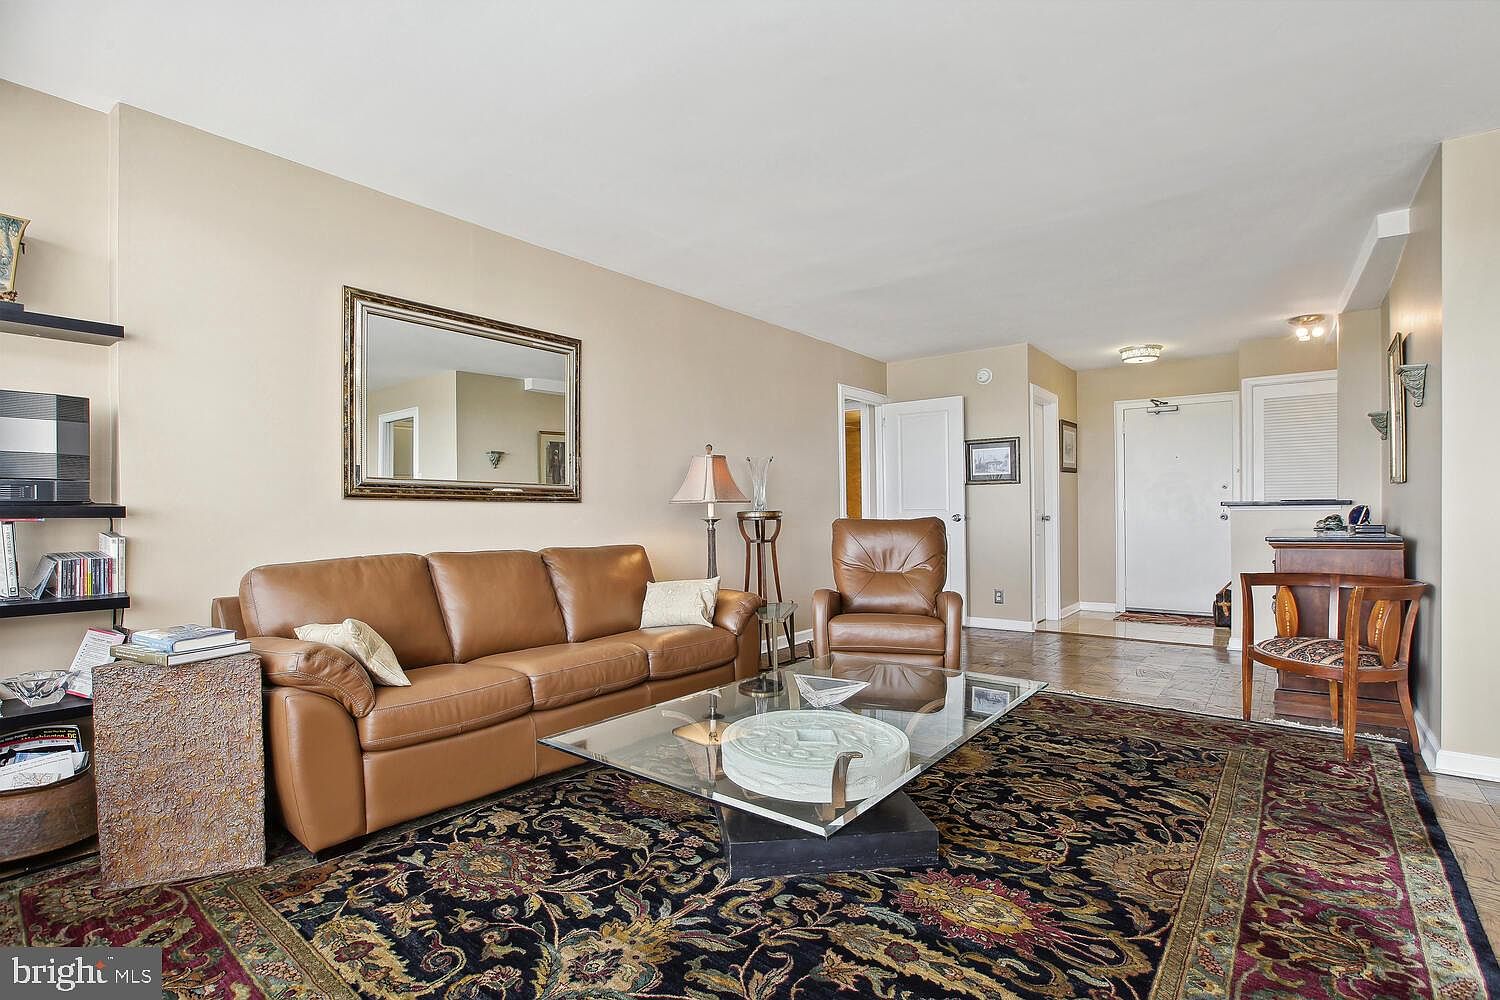 4515 Willard Ave APT 2308S, Chevy Chase, MD 20815 | Zillow